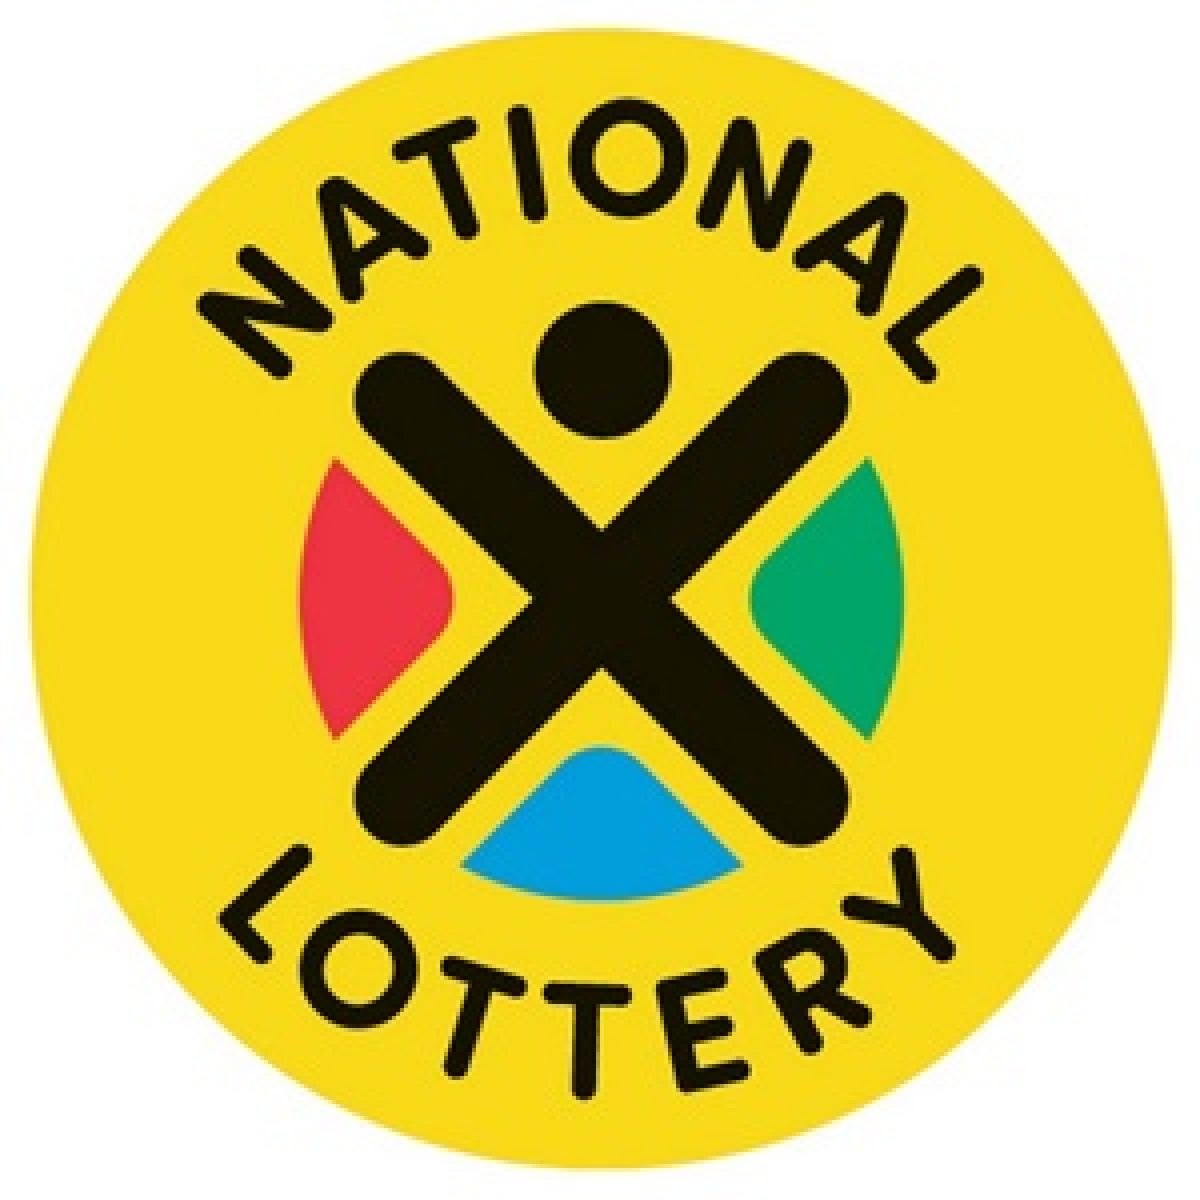 national lotto results for tonight